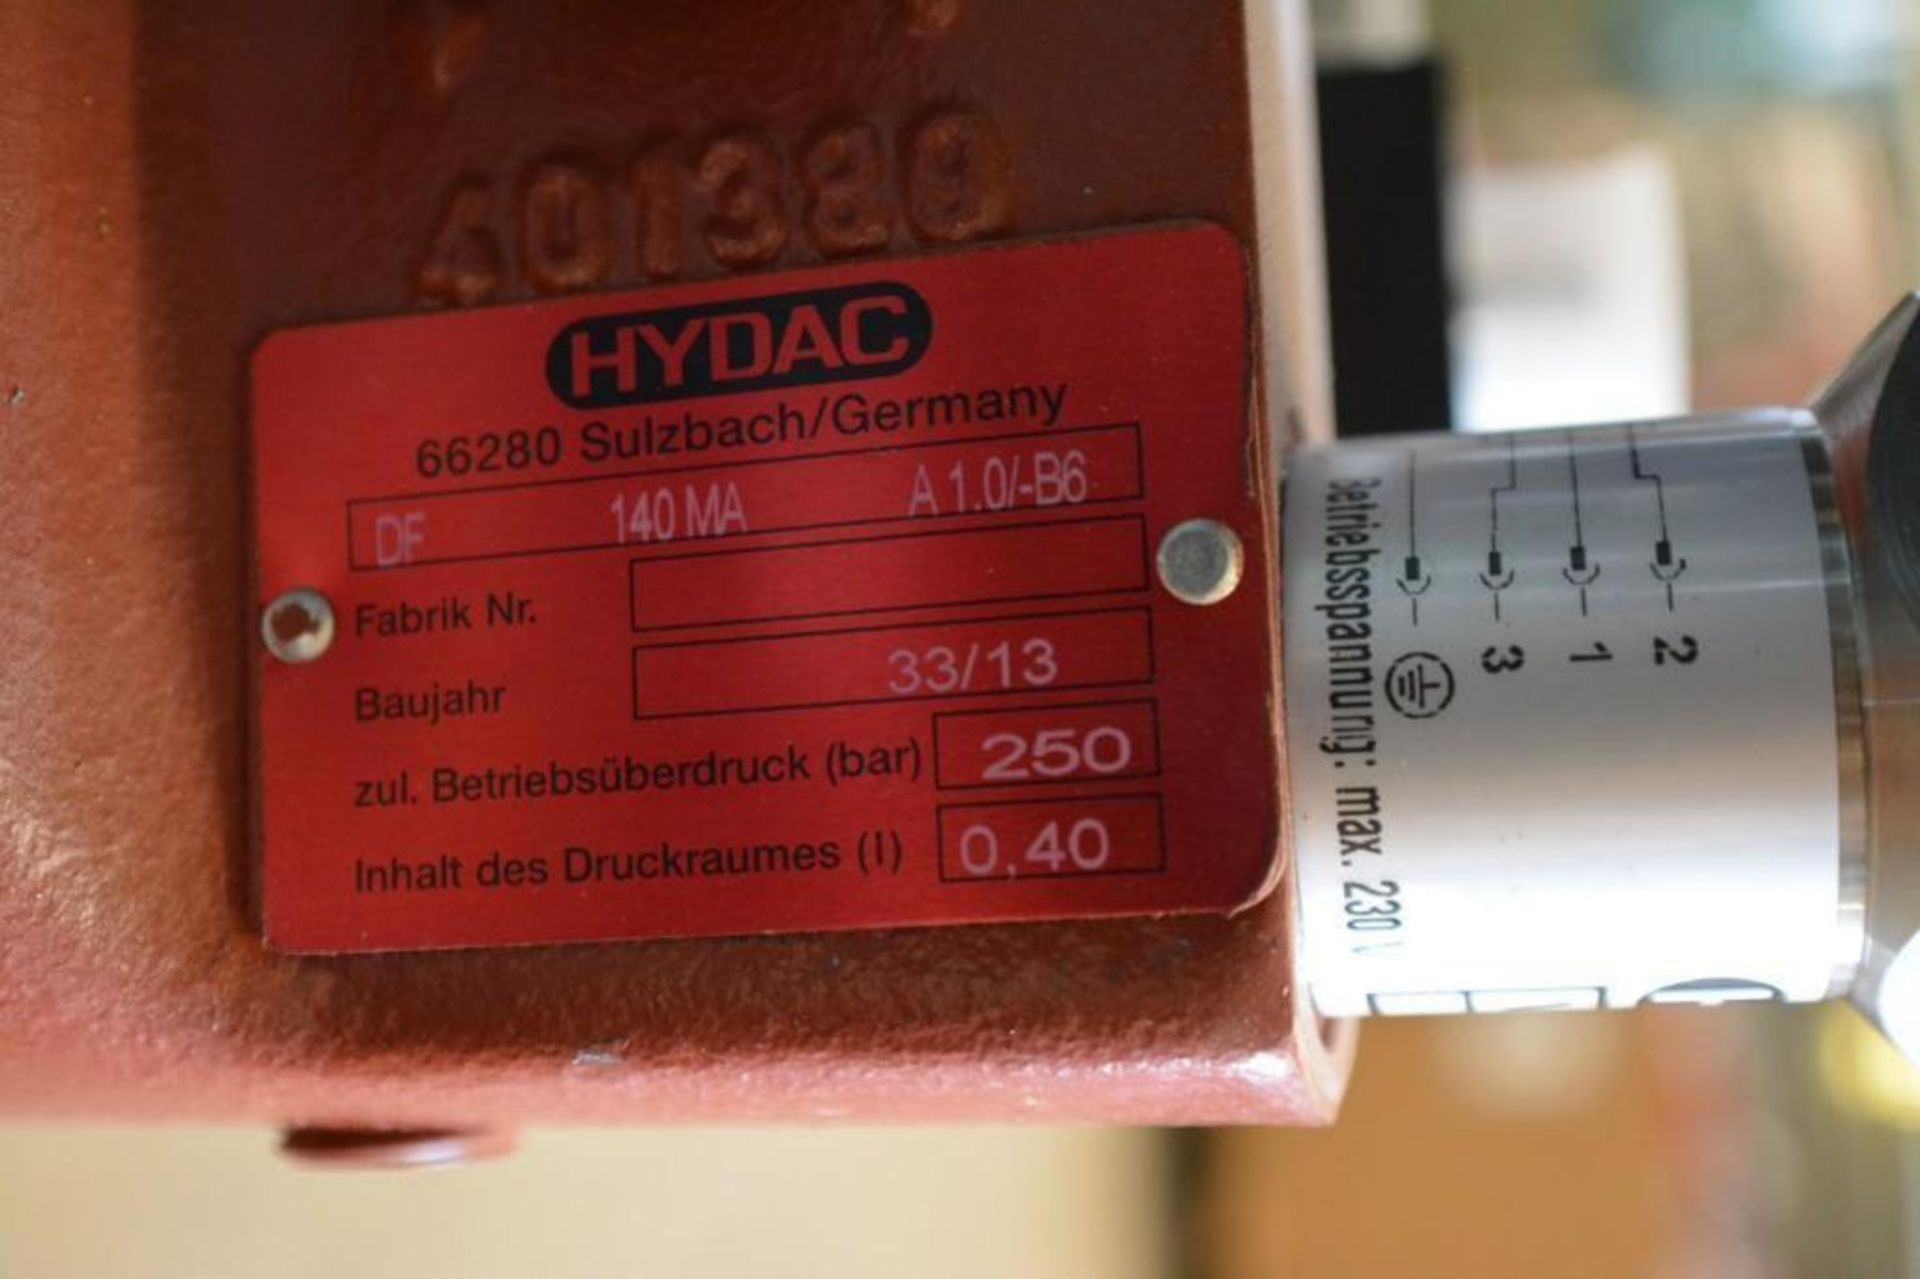 Hydac Hydraulic Pump item number 3682291. 2.2kW E-Motor # 1206060161 Pressure Relief Valve CE. (Phot - Image 7 of 7